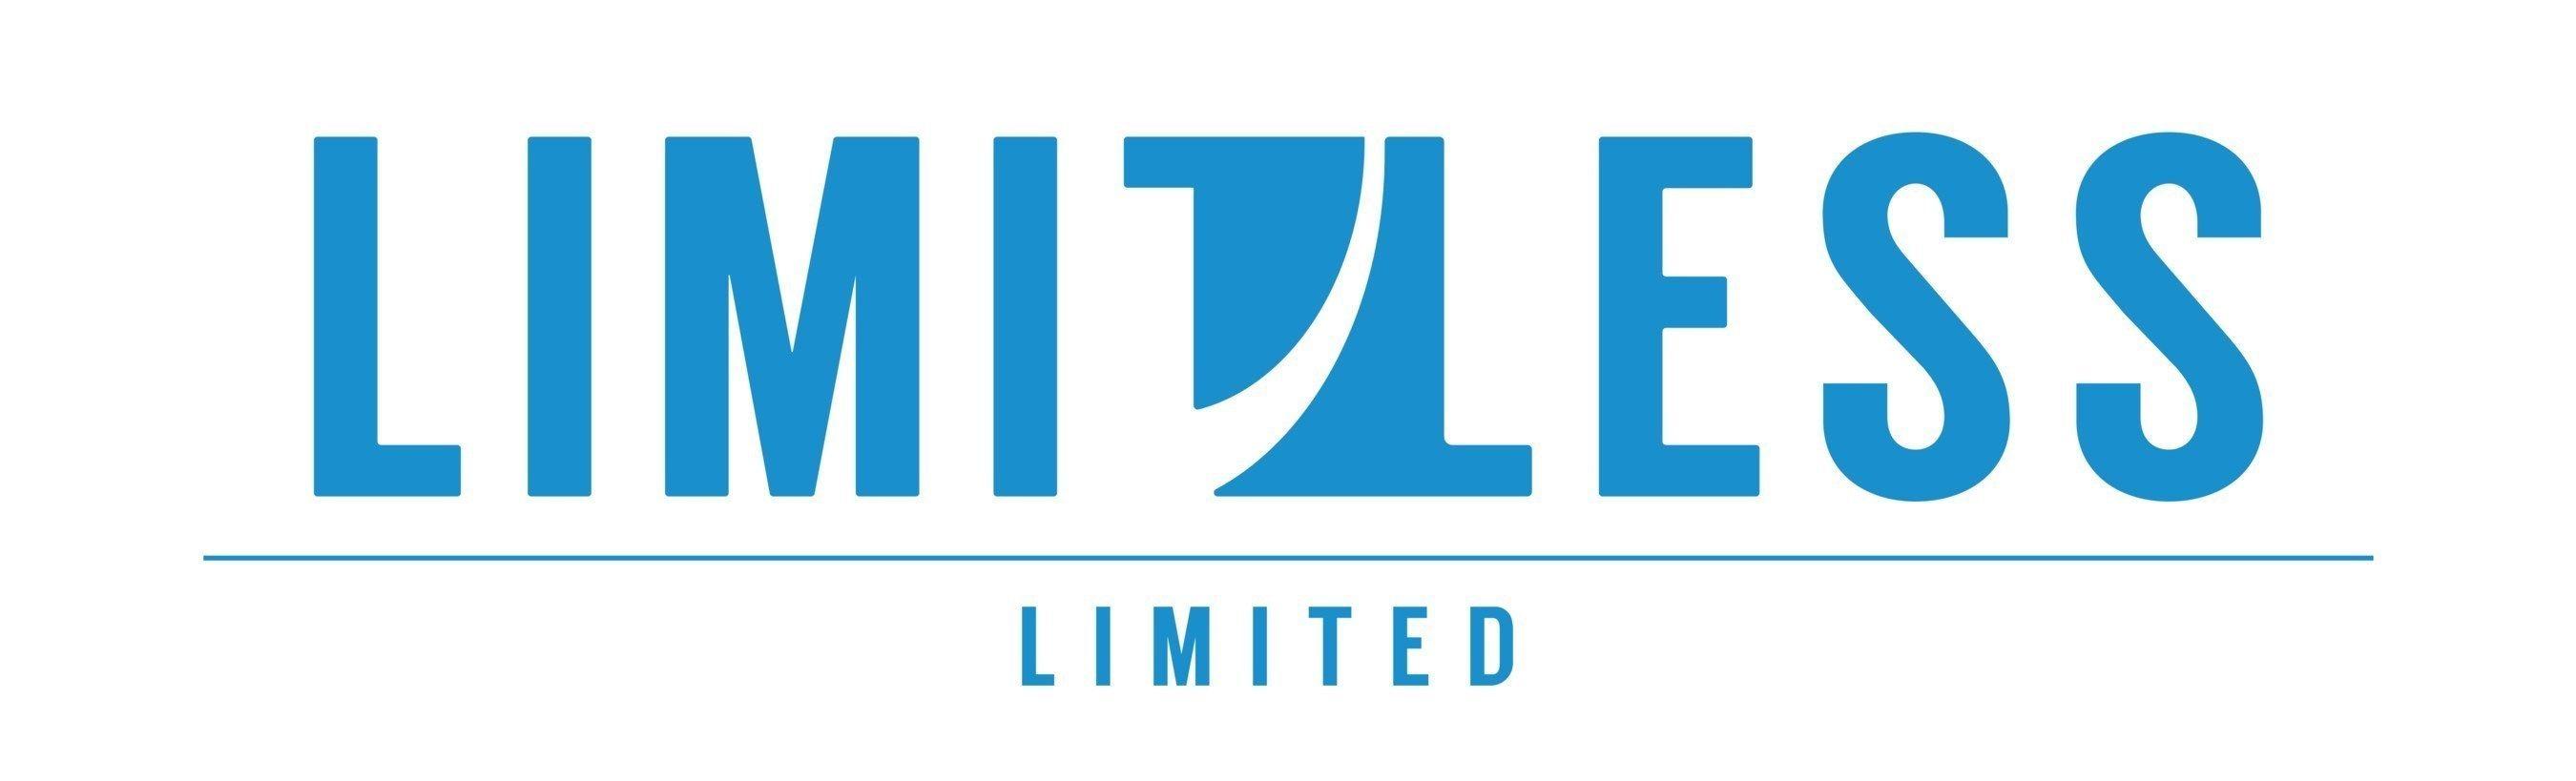 Blue Round Popular Company Logo - VR Company Limitless, LTD. Secures Seed Round Funding from Top ...